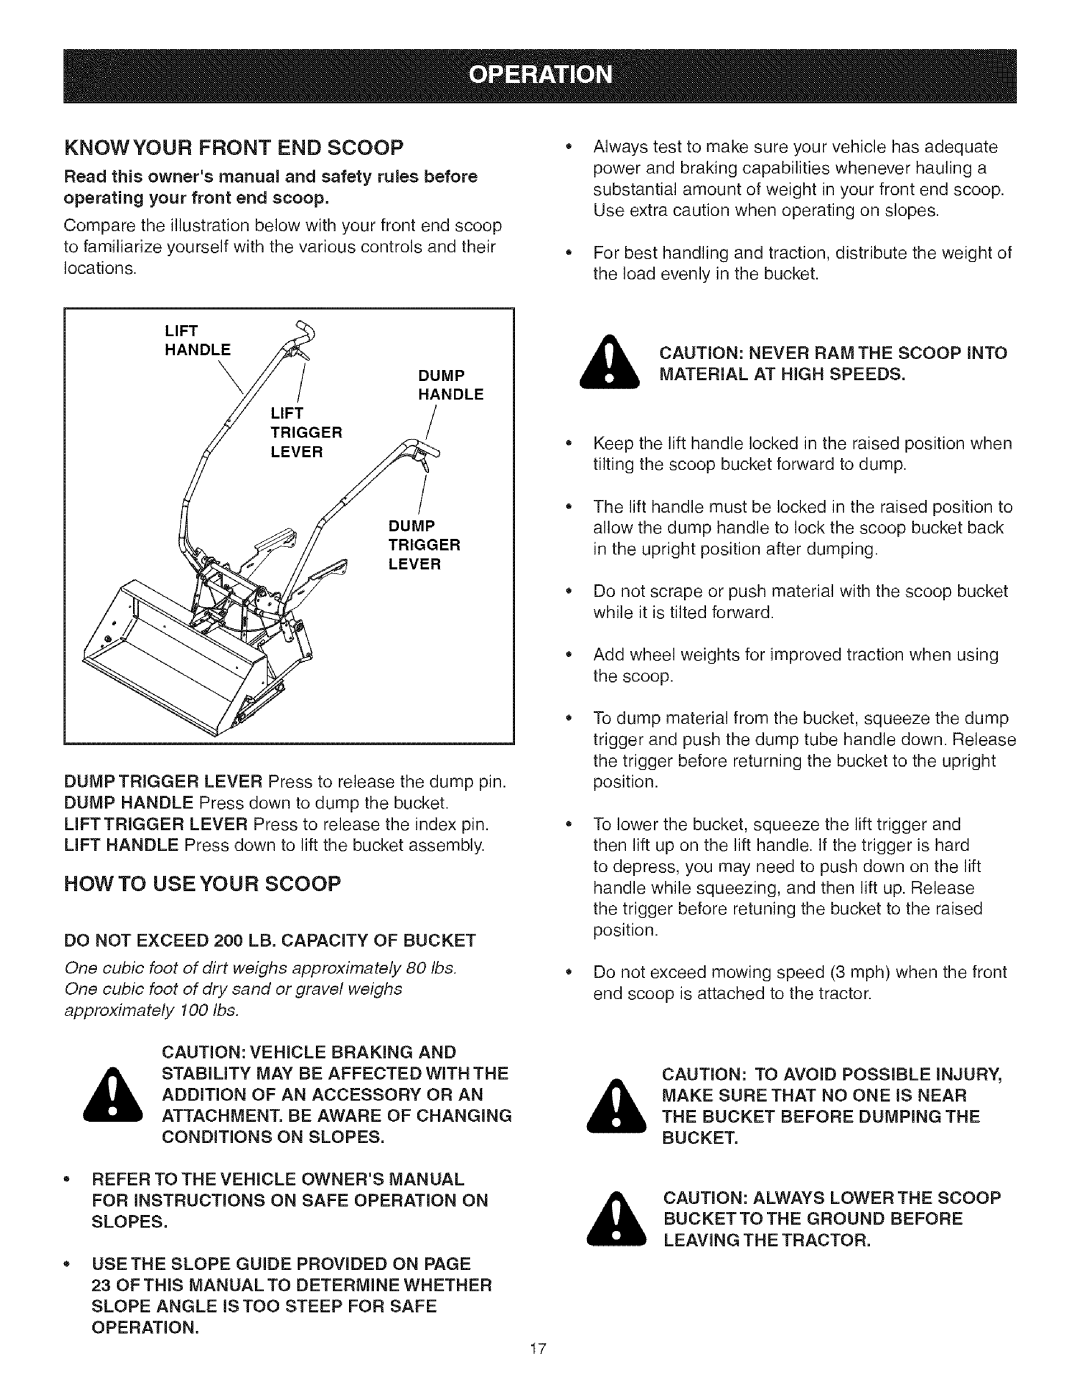 Craftsman 486.248473 manual How To Use Your Scoop, Lift Handle, Dump Trigger Lever, Slopes, Operation, Leaving The Tractor 